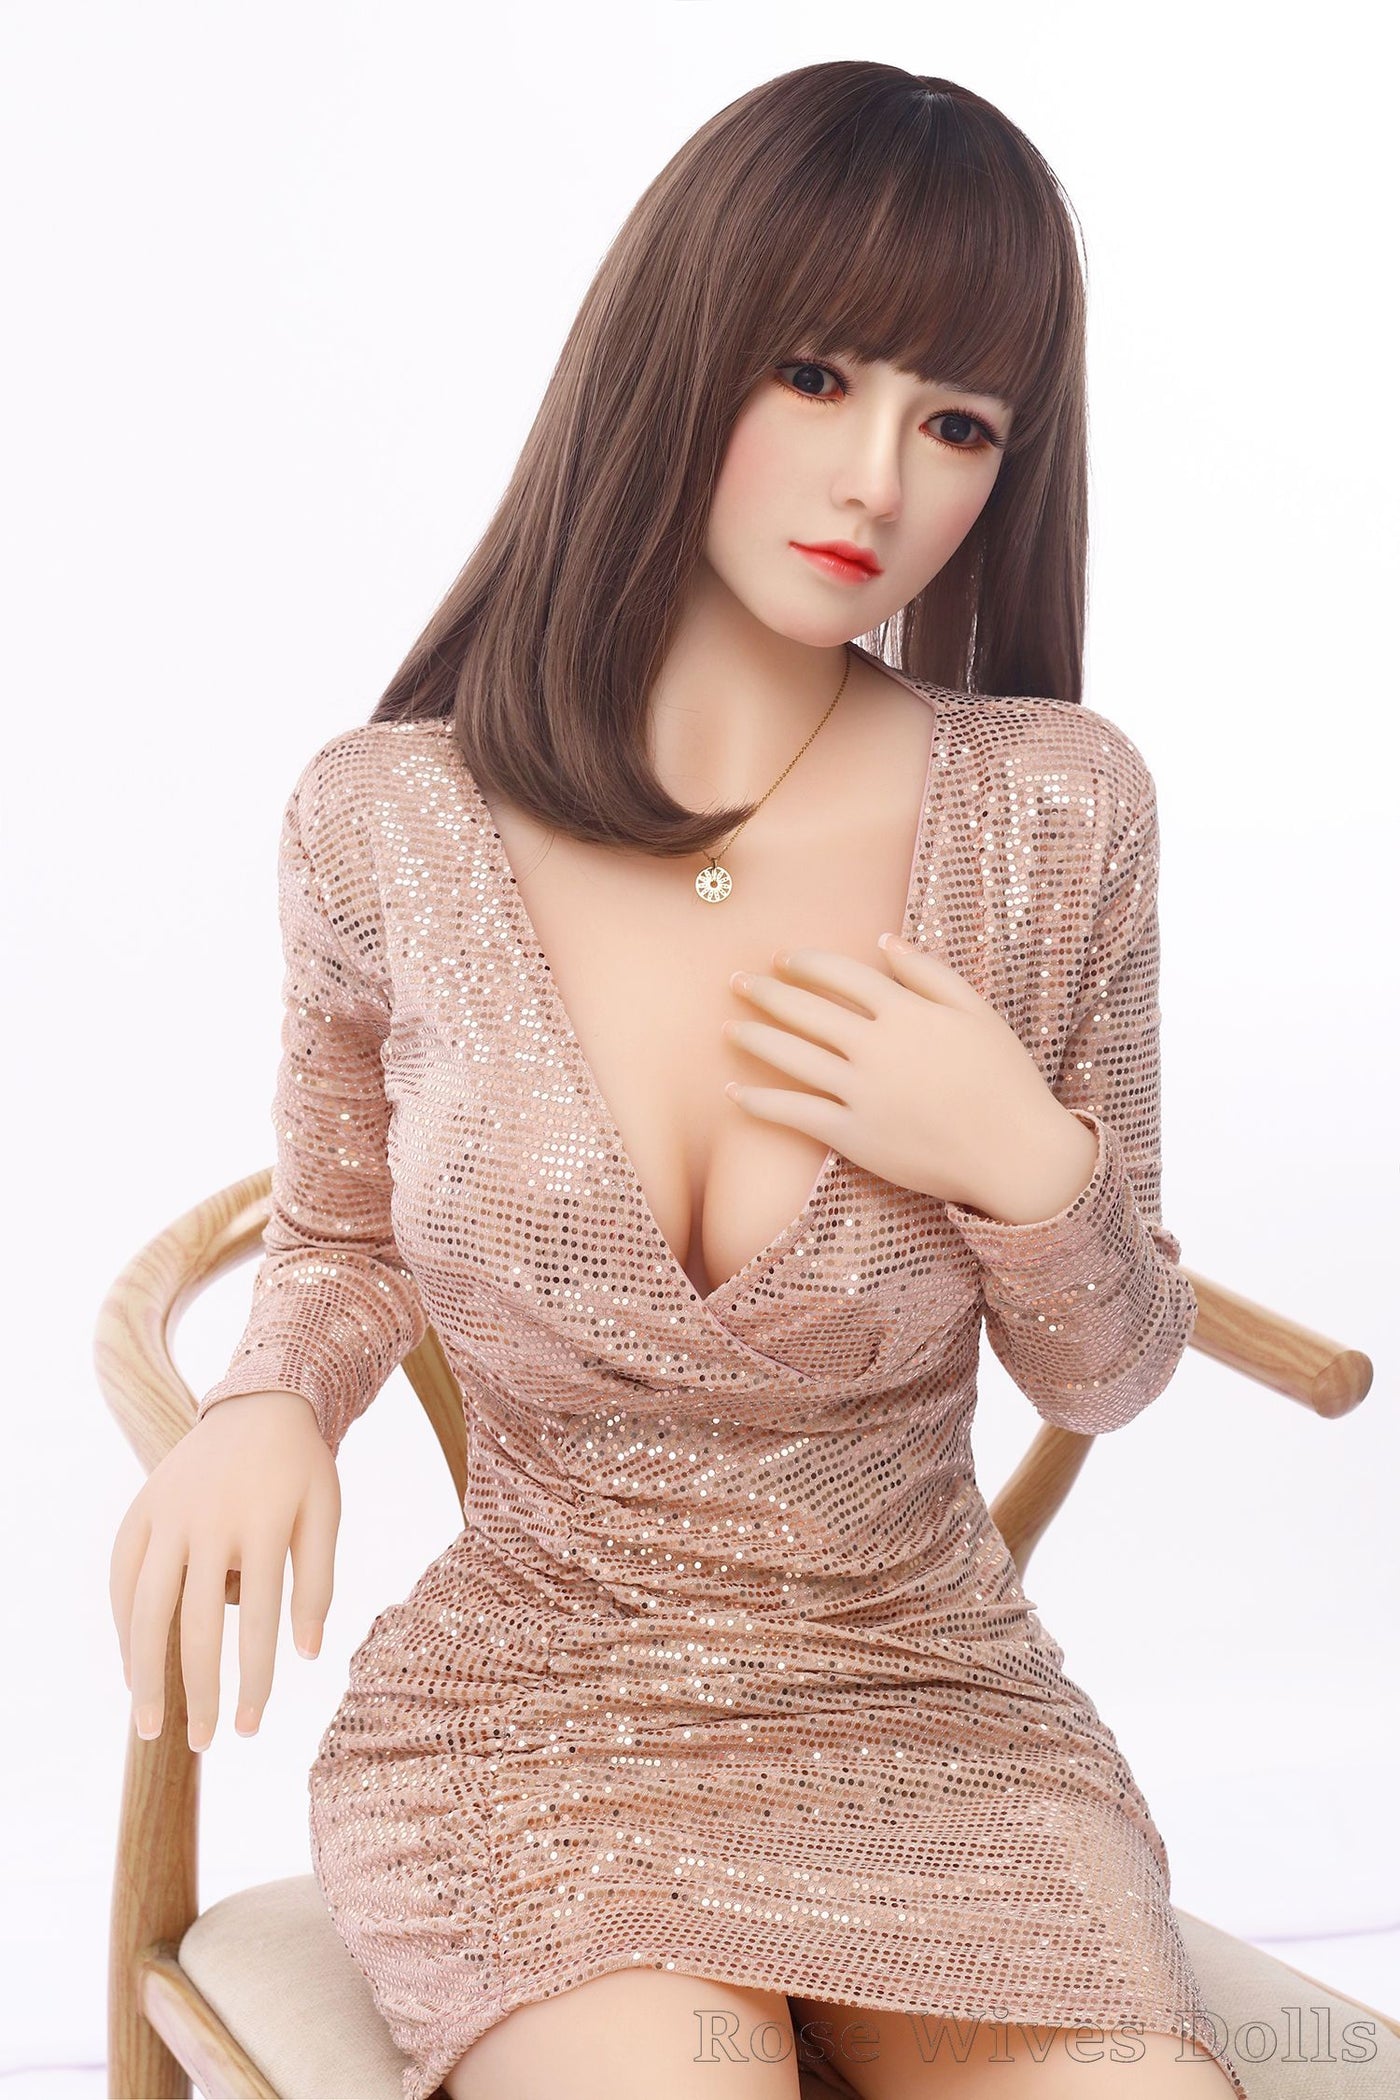 Andy - 5ft2in (158cm) Sexy Slender Lady TPE Sex Doll with Silicone Head